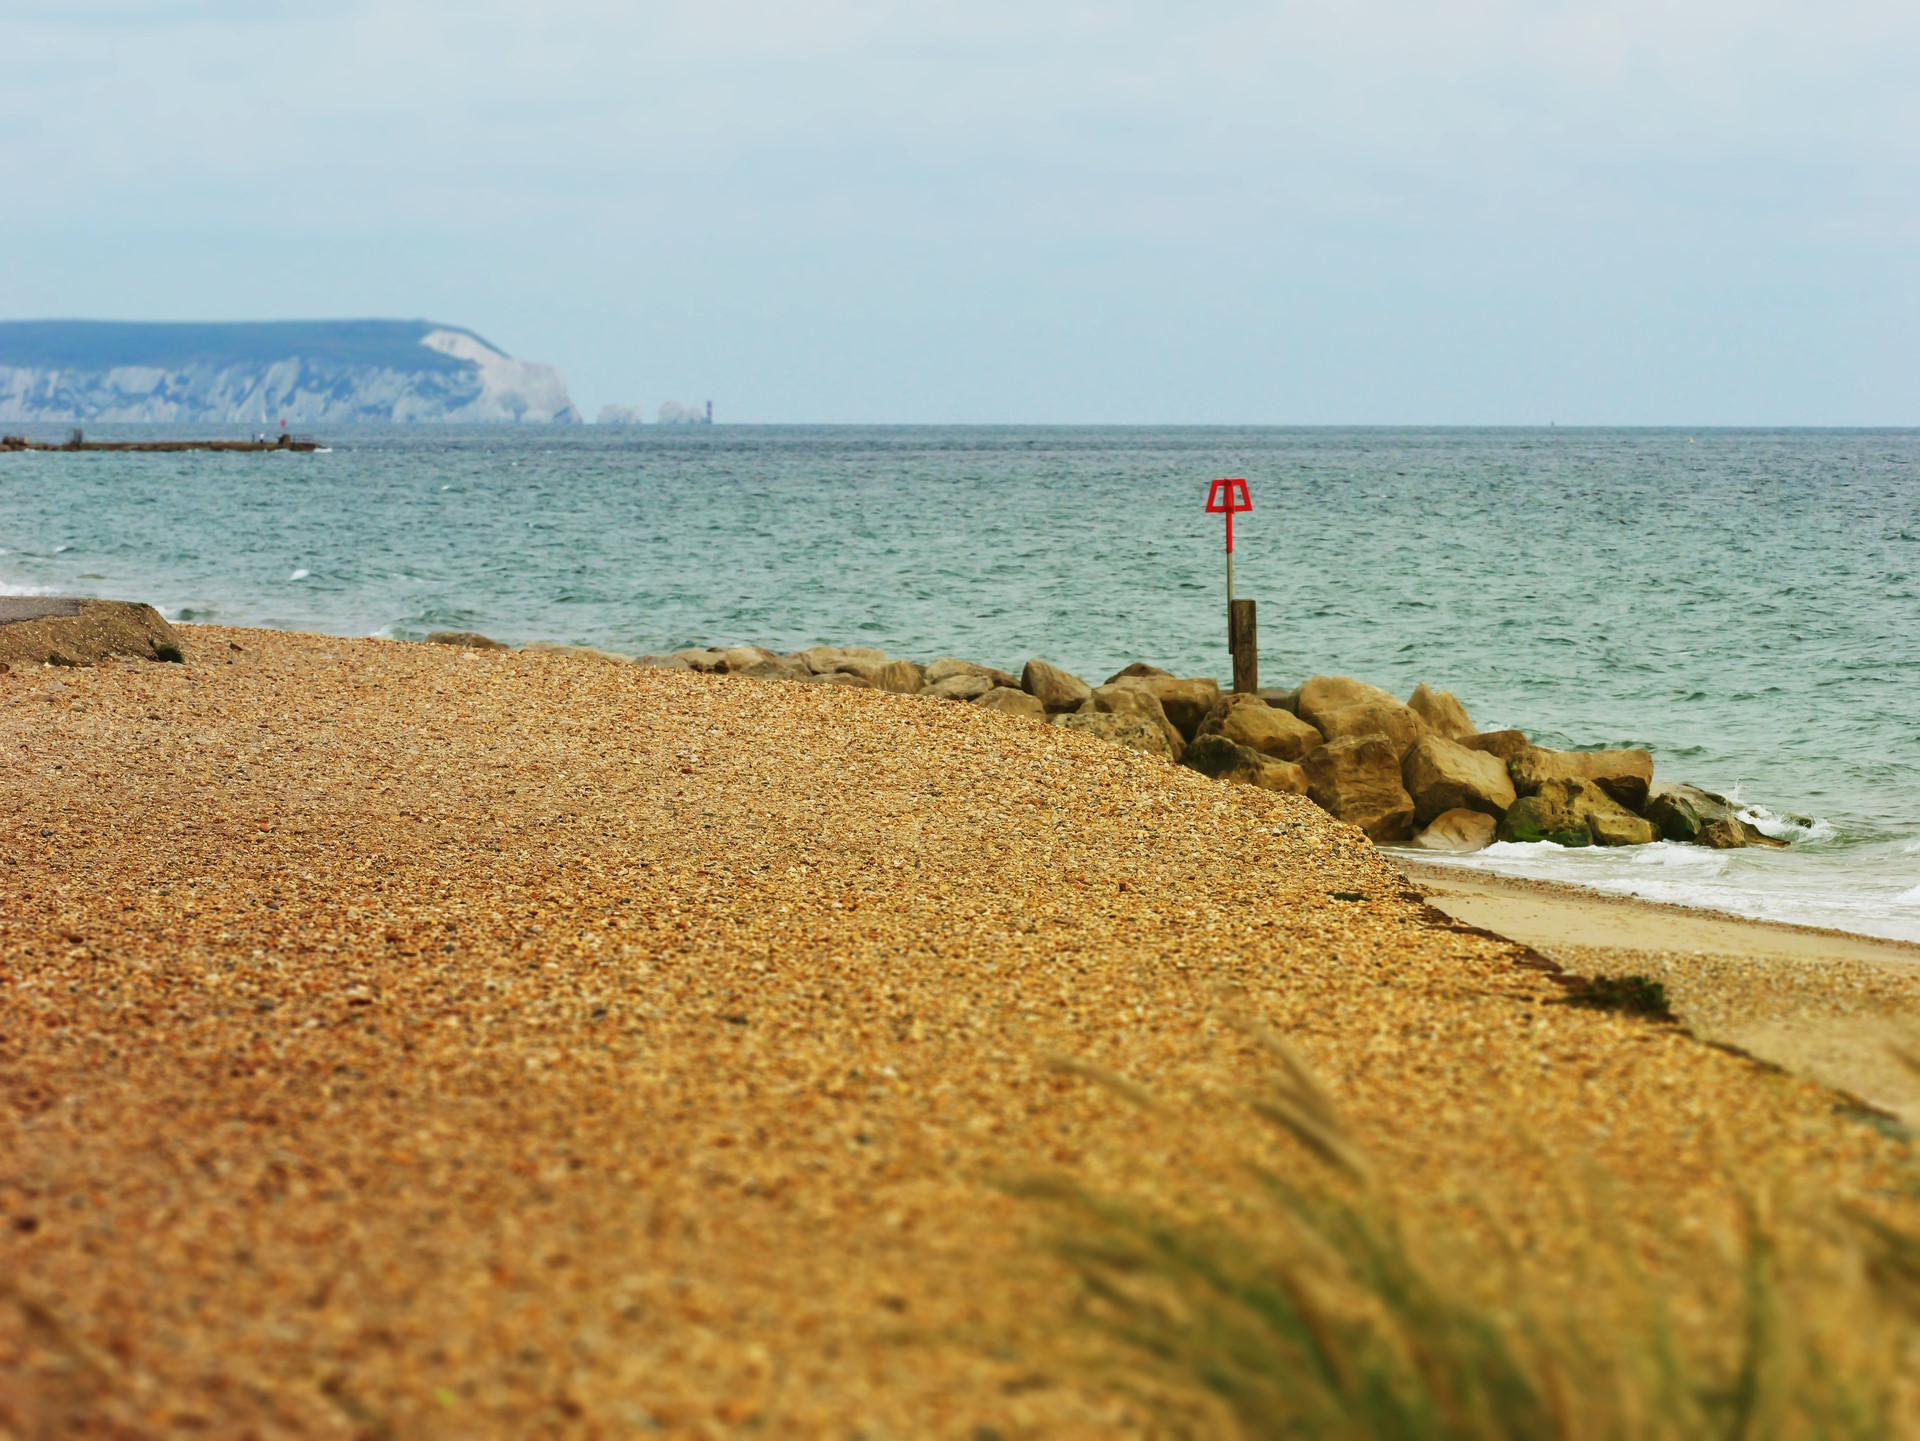 Looking towards The Needles from the approach to Hengistbury Head.